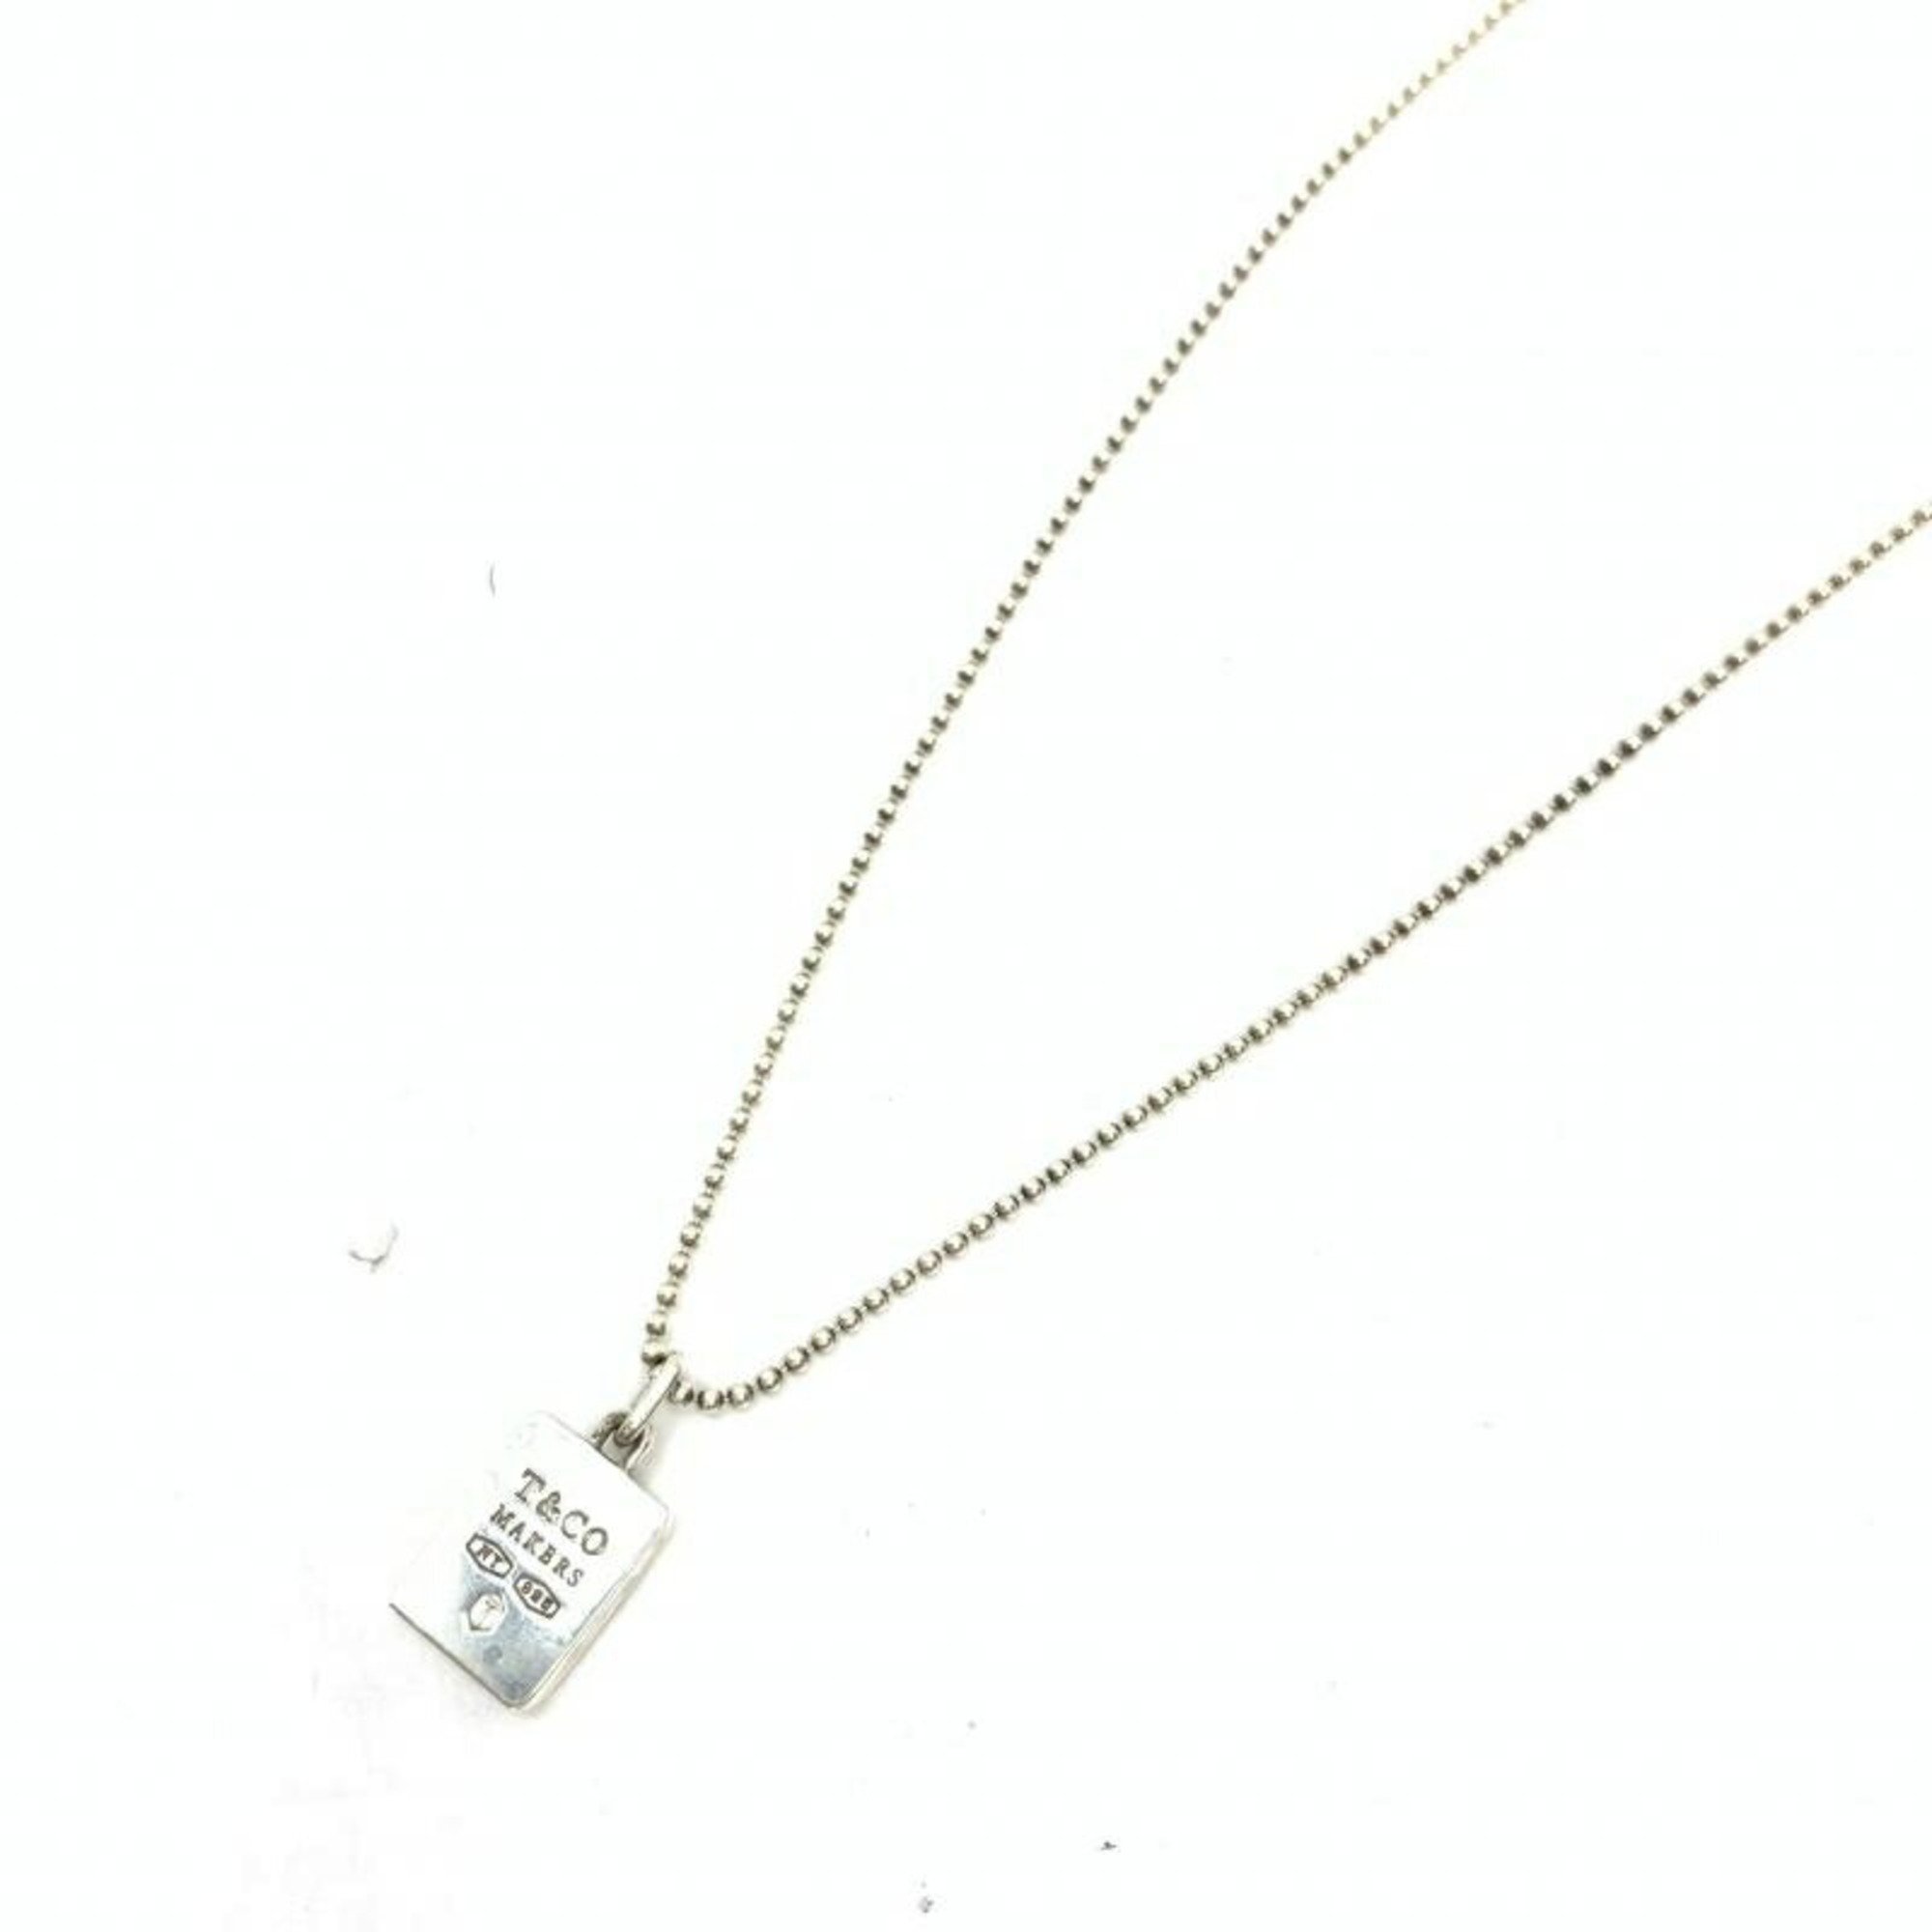 Tiffany Makers Square Necklace